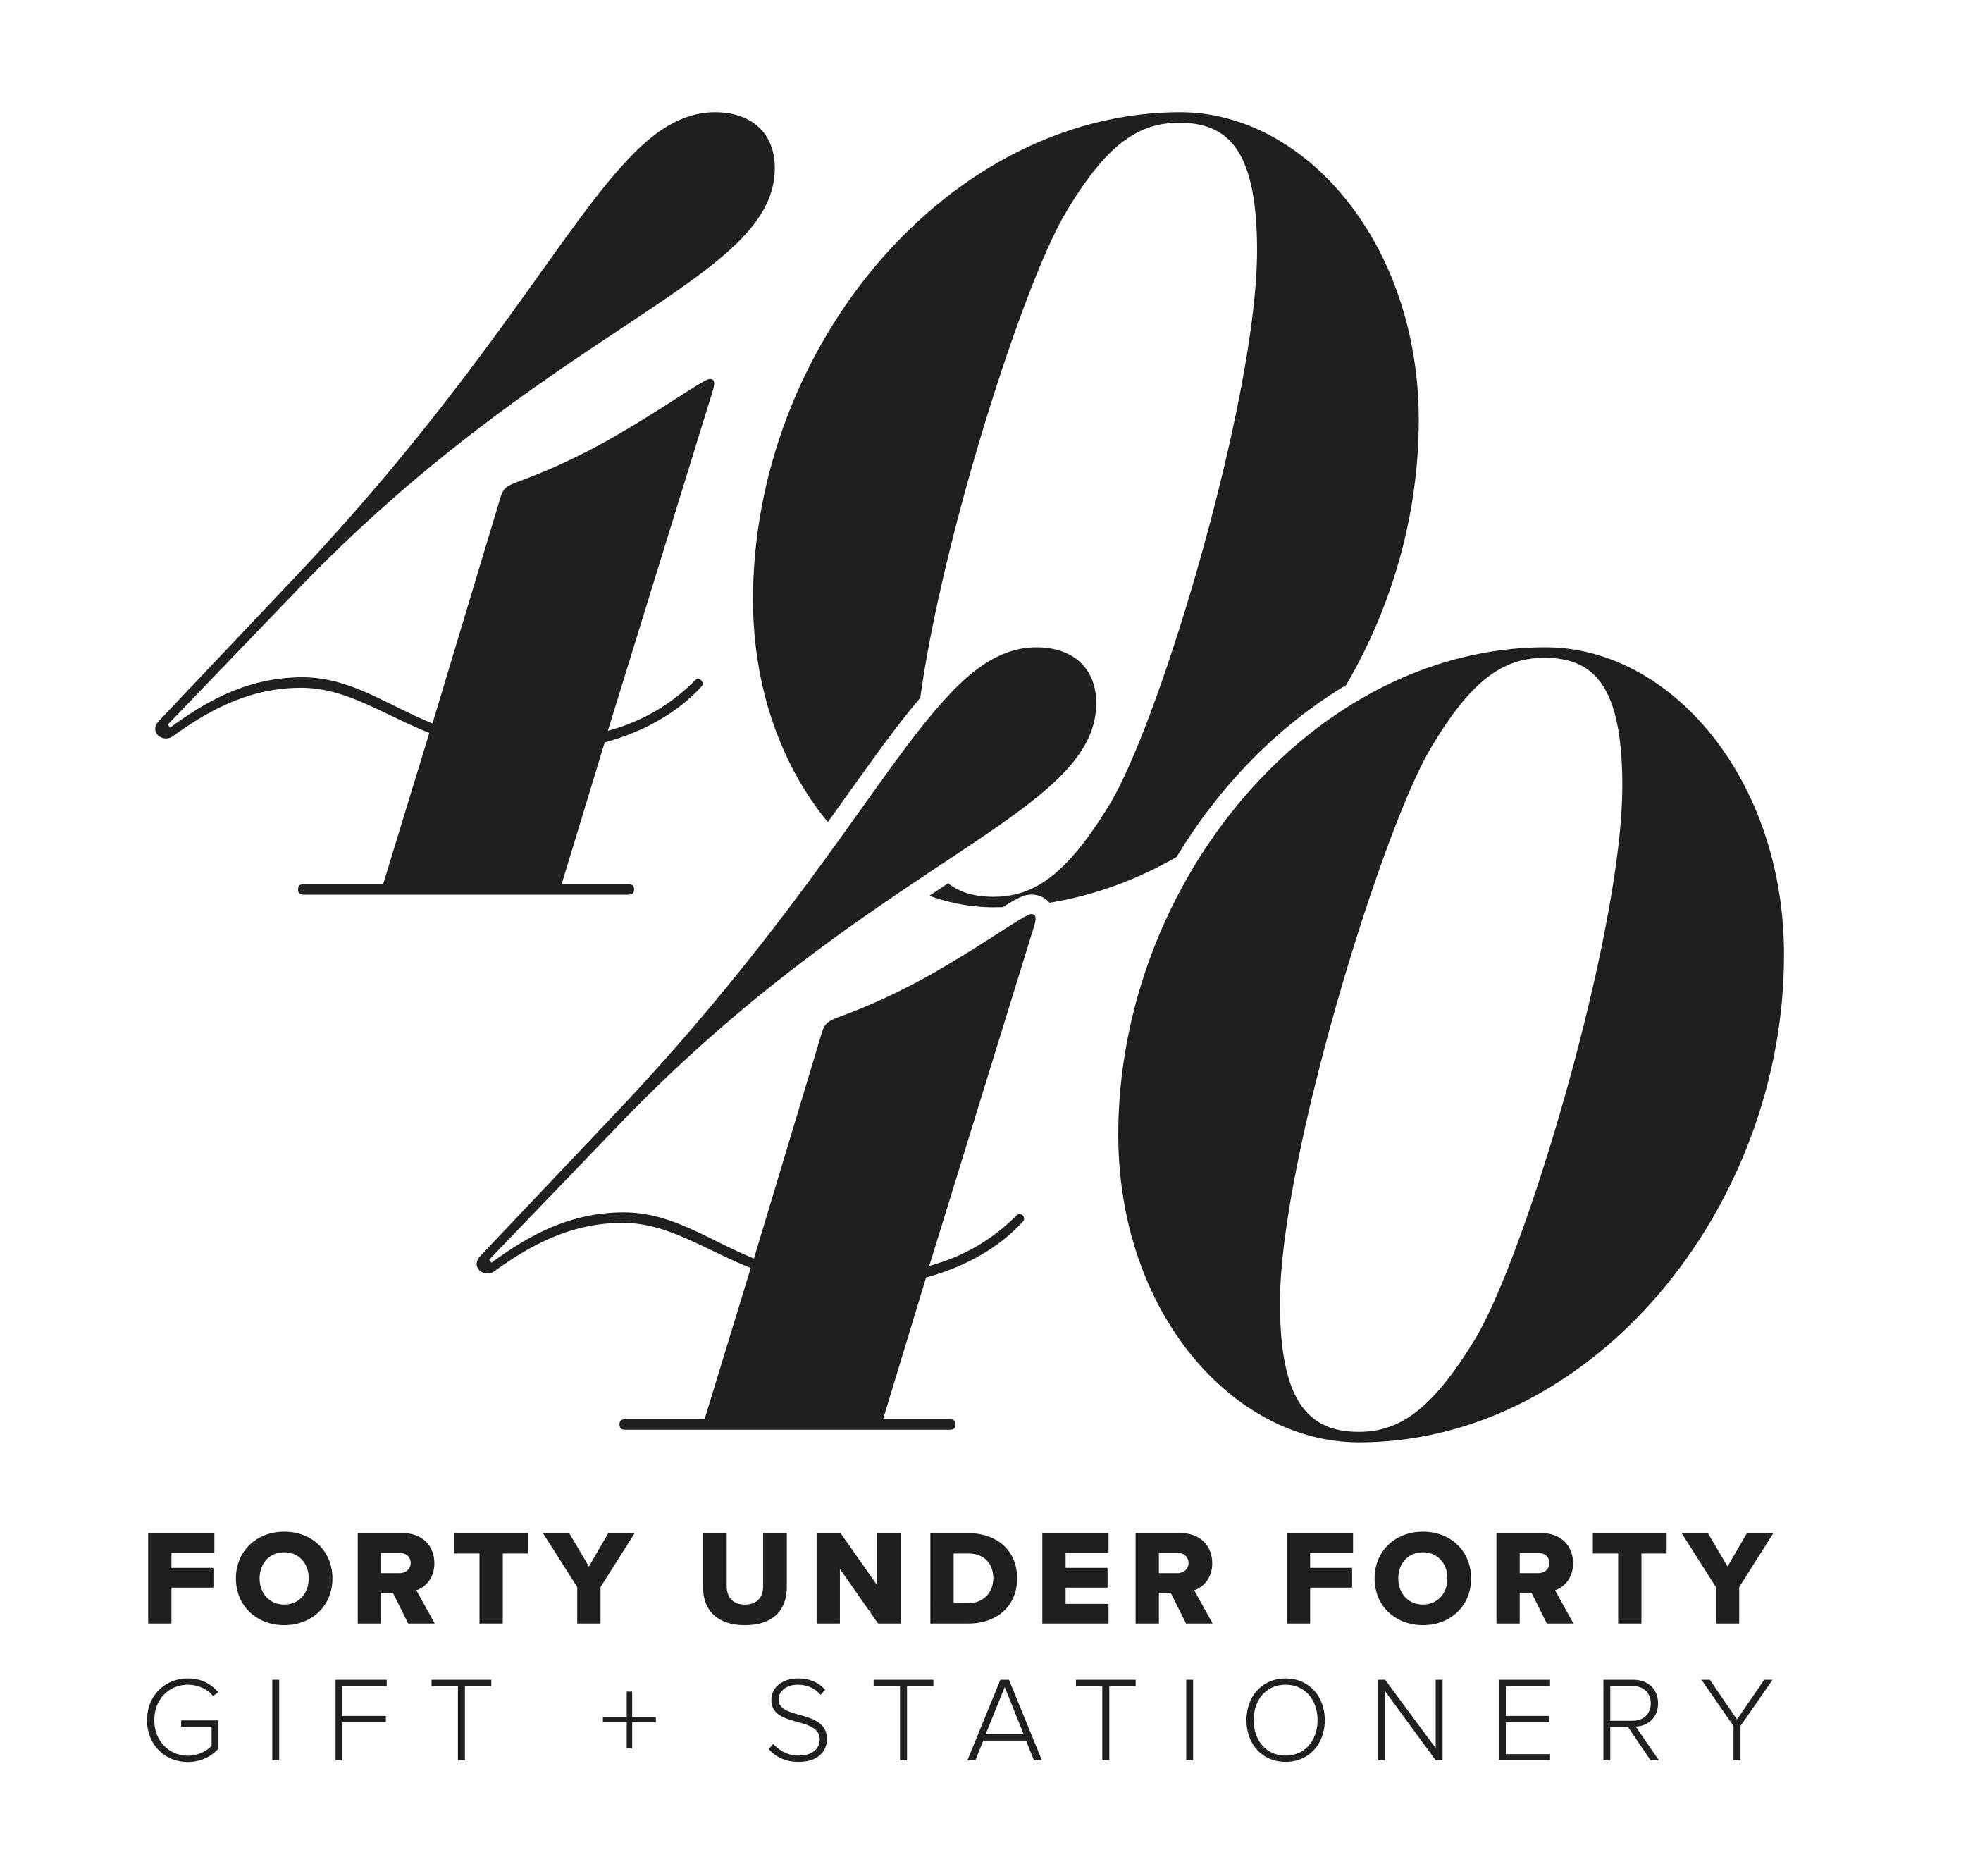 40 Logo - Inaugural Gift + Stationery 40 Under 40 Awards announced during Las ...